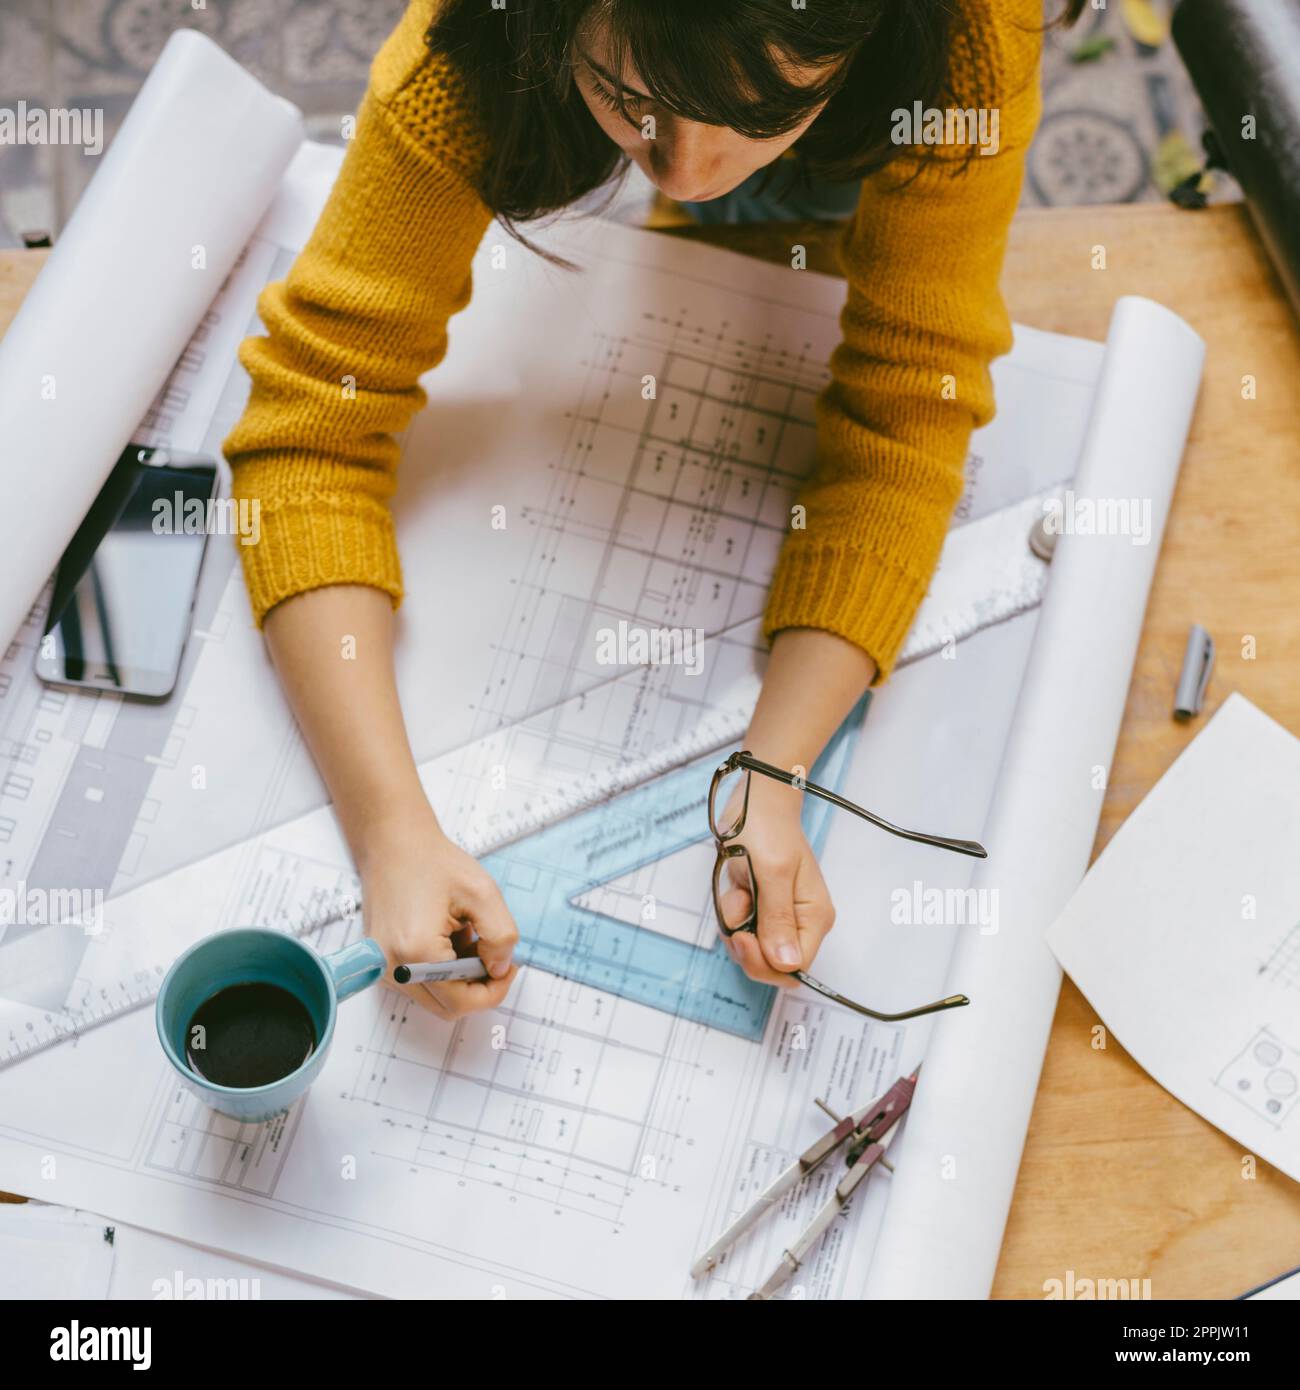 Top view of architect woman working on architectural project for interior design. Stock Photo